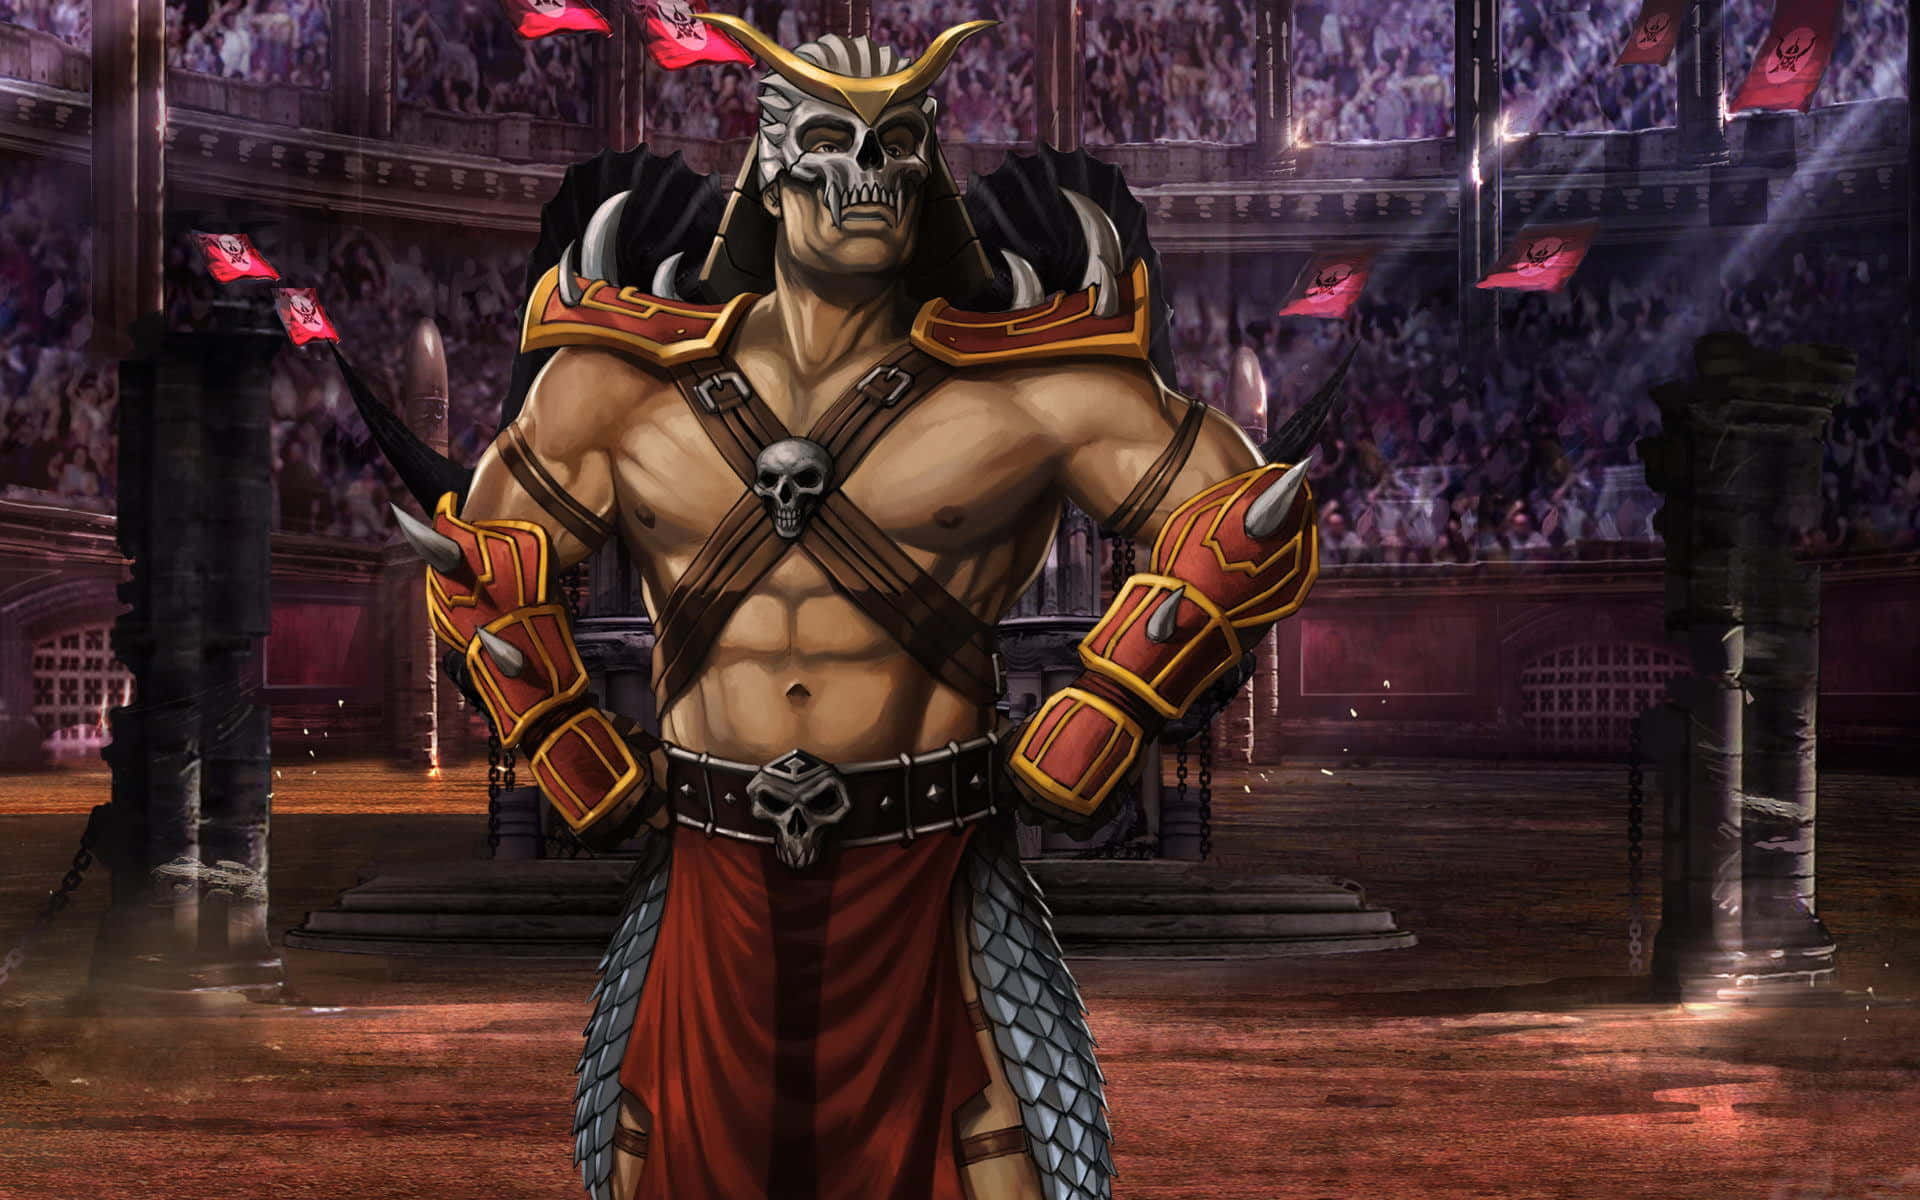 Shao Kahn, The Mighty Emperor of Outworld, Standing Triumphant in Mortal Kombat Wallpaper